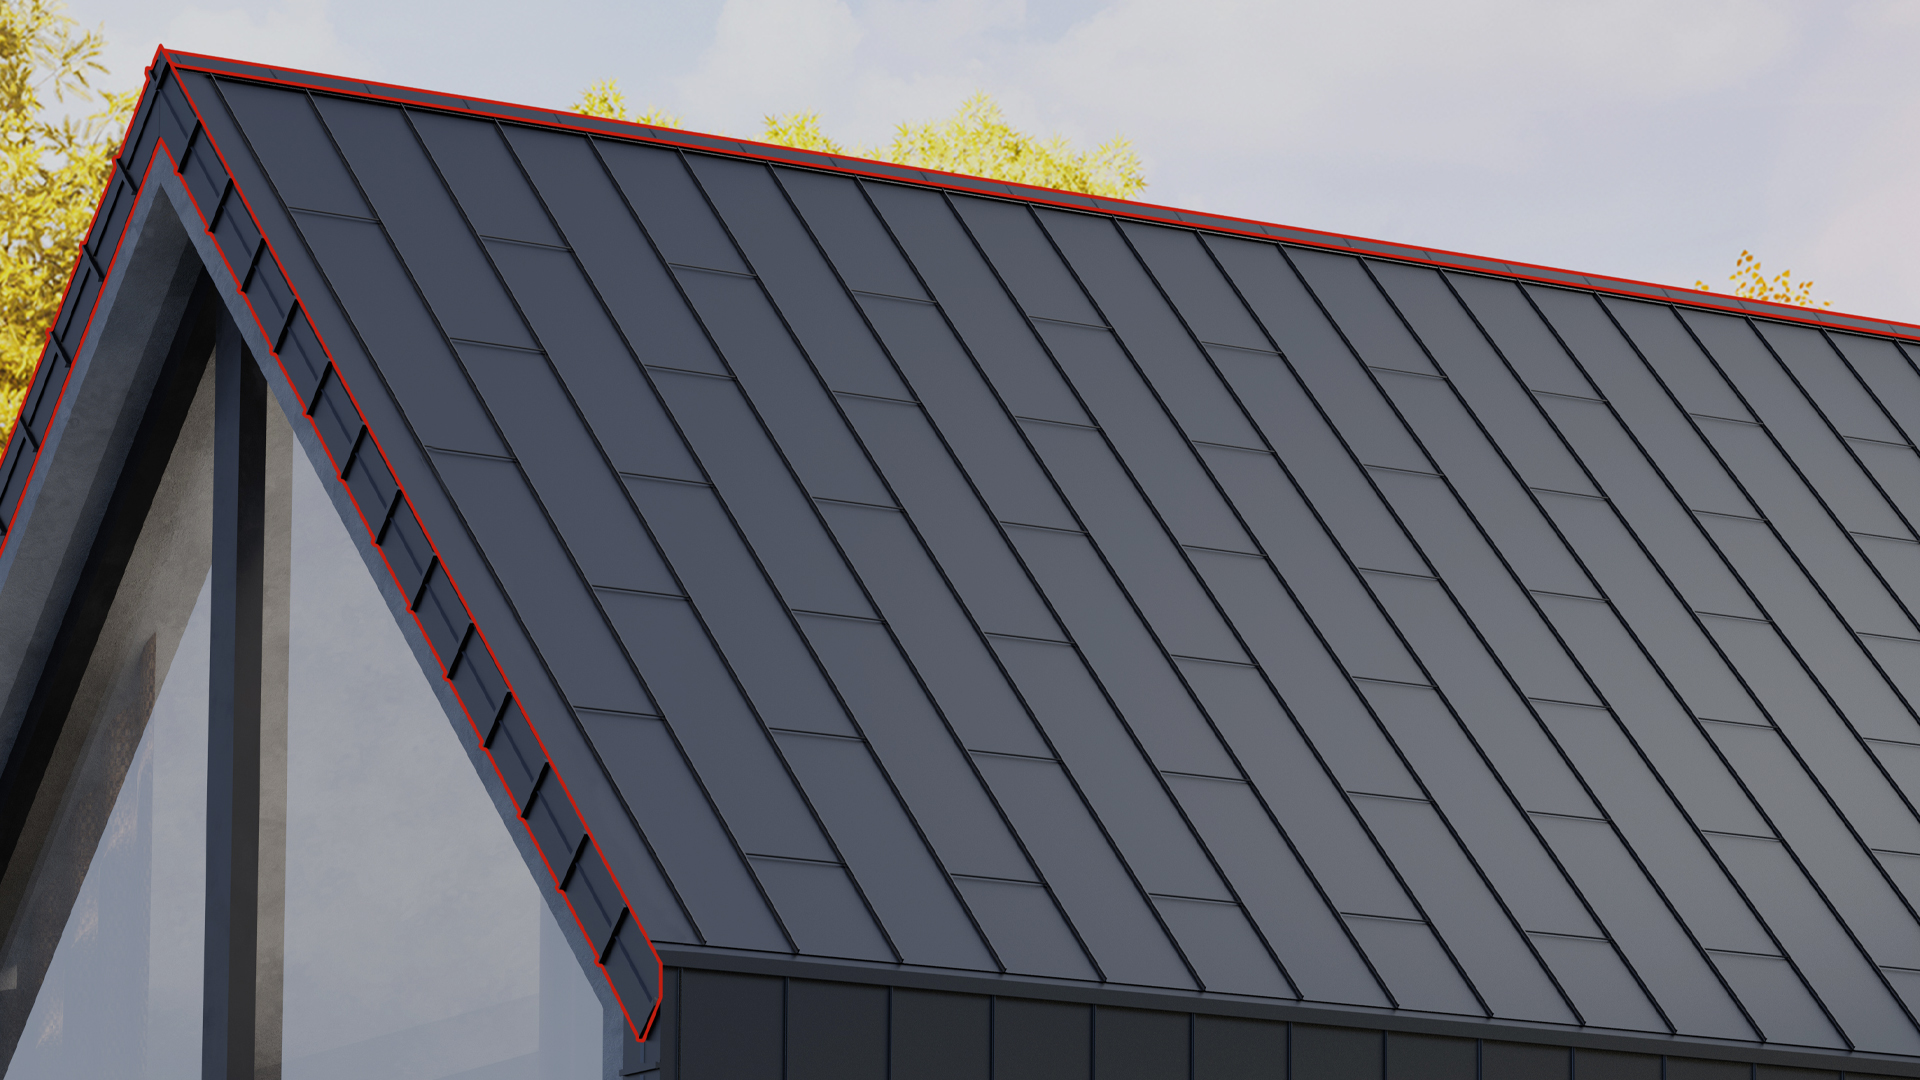 Innovative flashings that speed up the roofing work